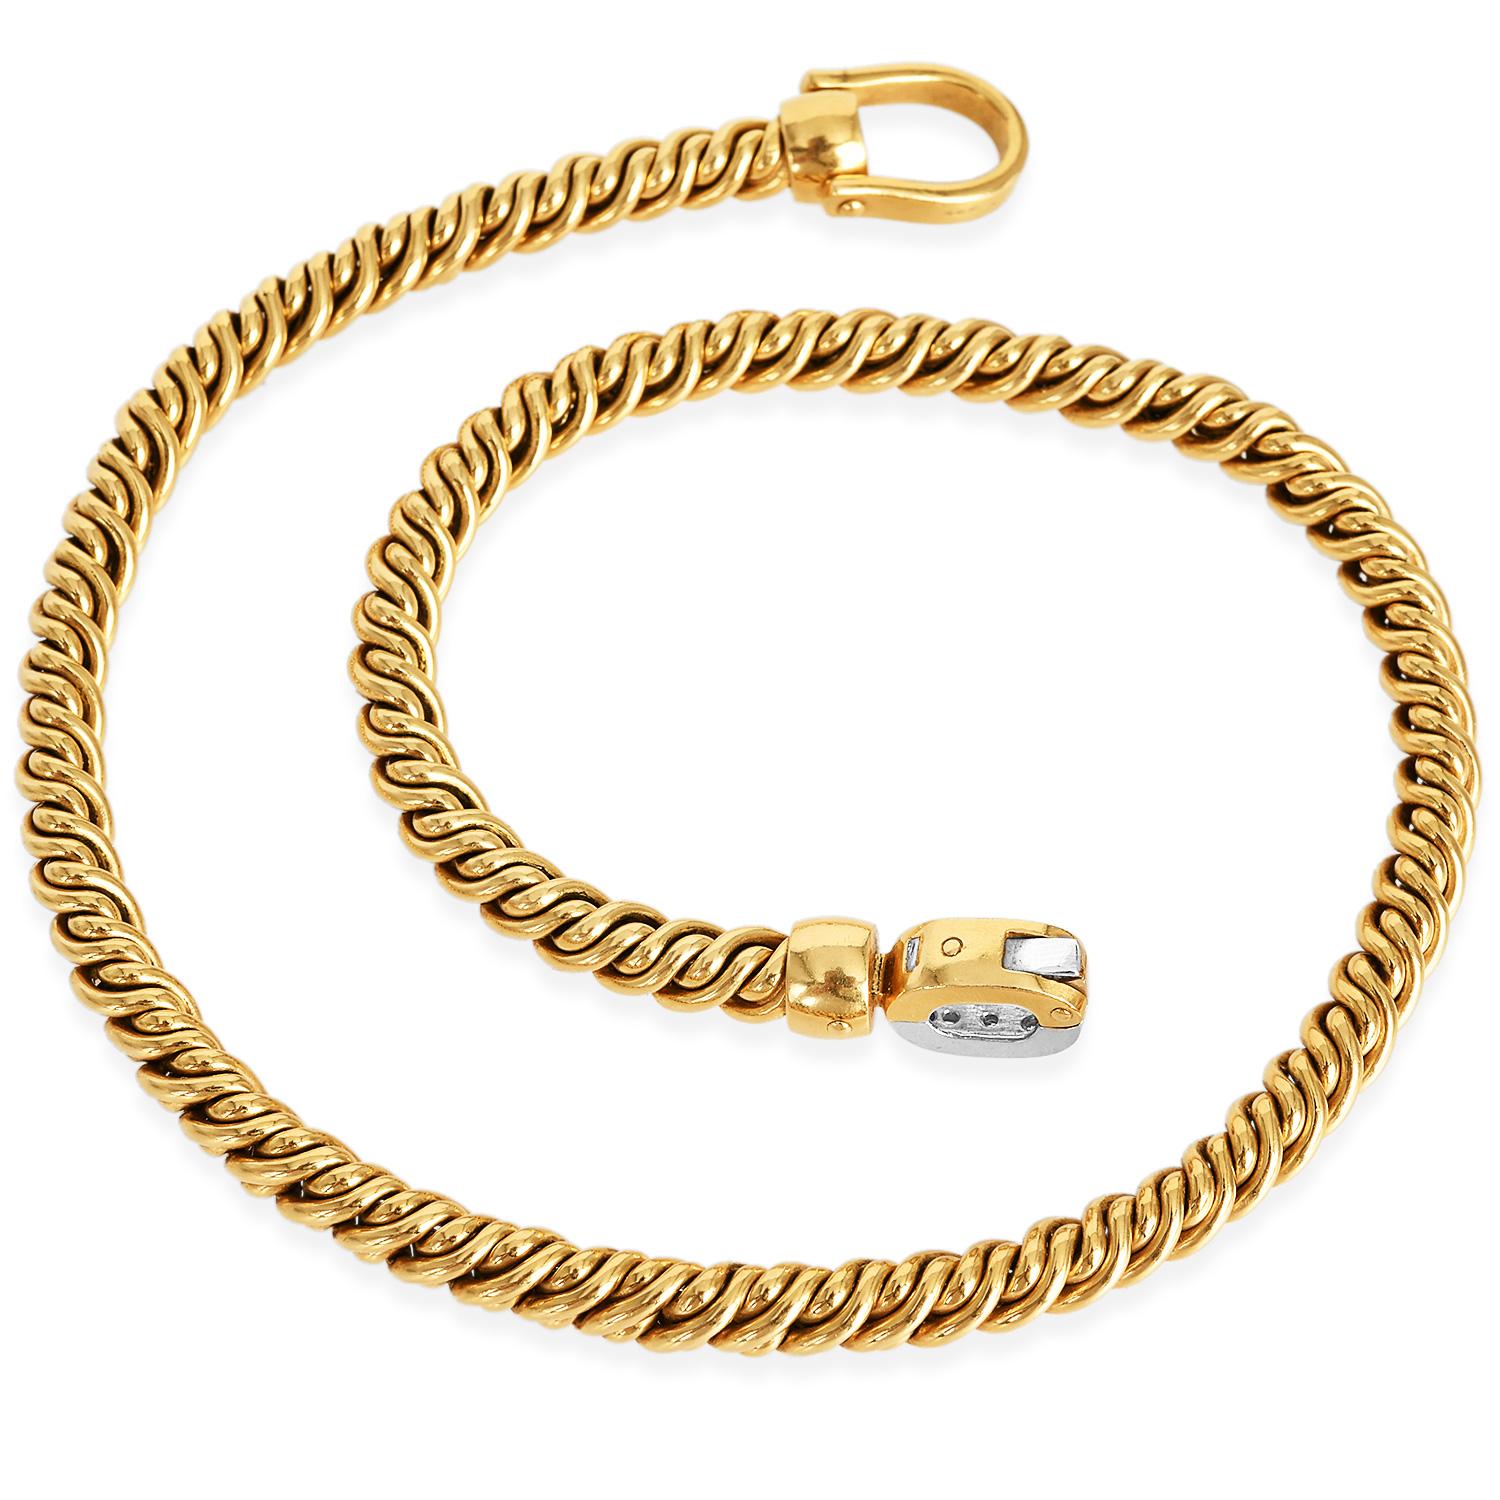 Pomellato Diamond 18K Gold Rope Chain Hardware Link Bracelet

Presenting a Statement necklace Made in 18K Yellow and white gold. The necklace has a natural diamond Prong set in White gold. 

Secured with a fold-over Jewelry Clasp. 

Metal: 18K